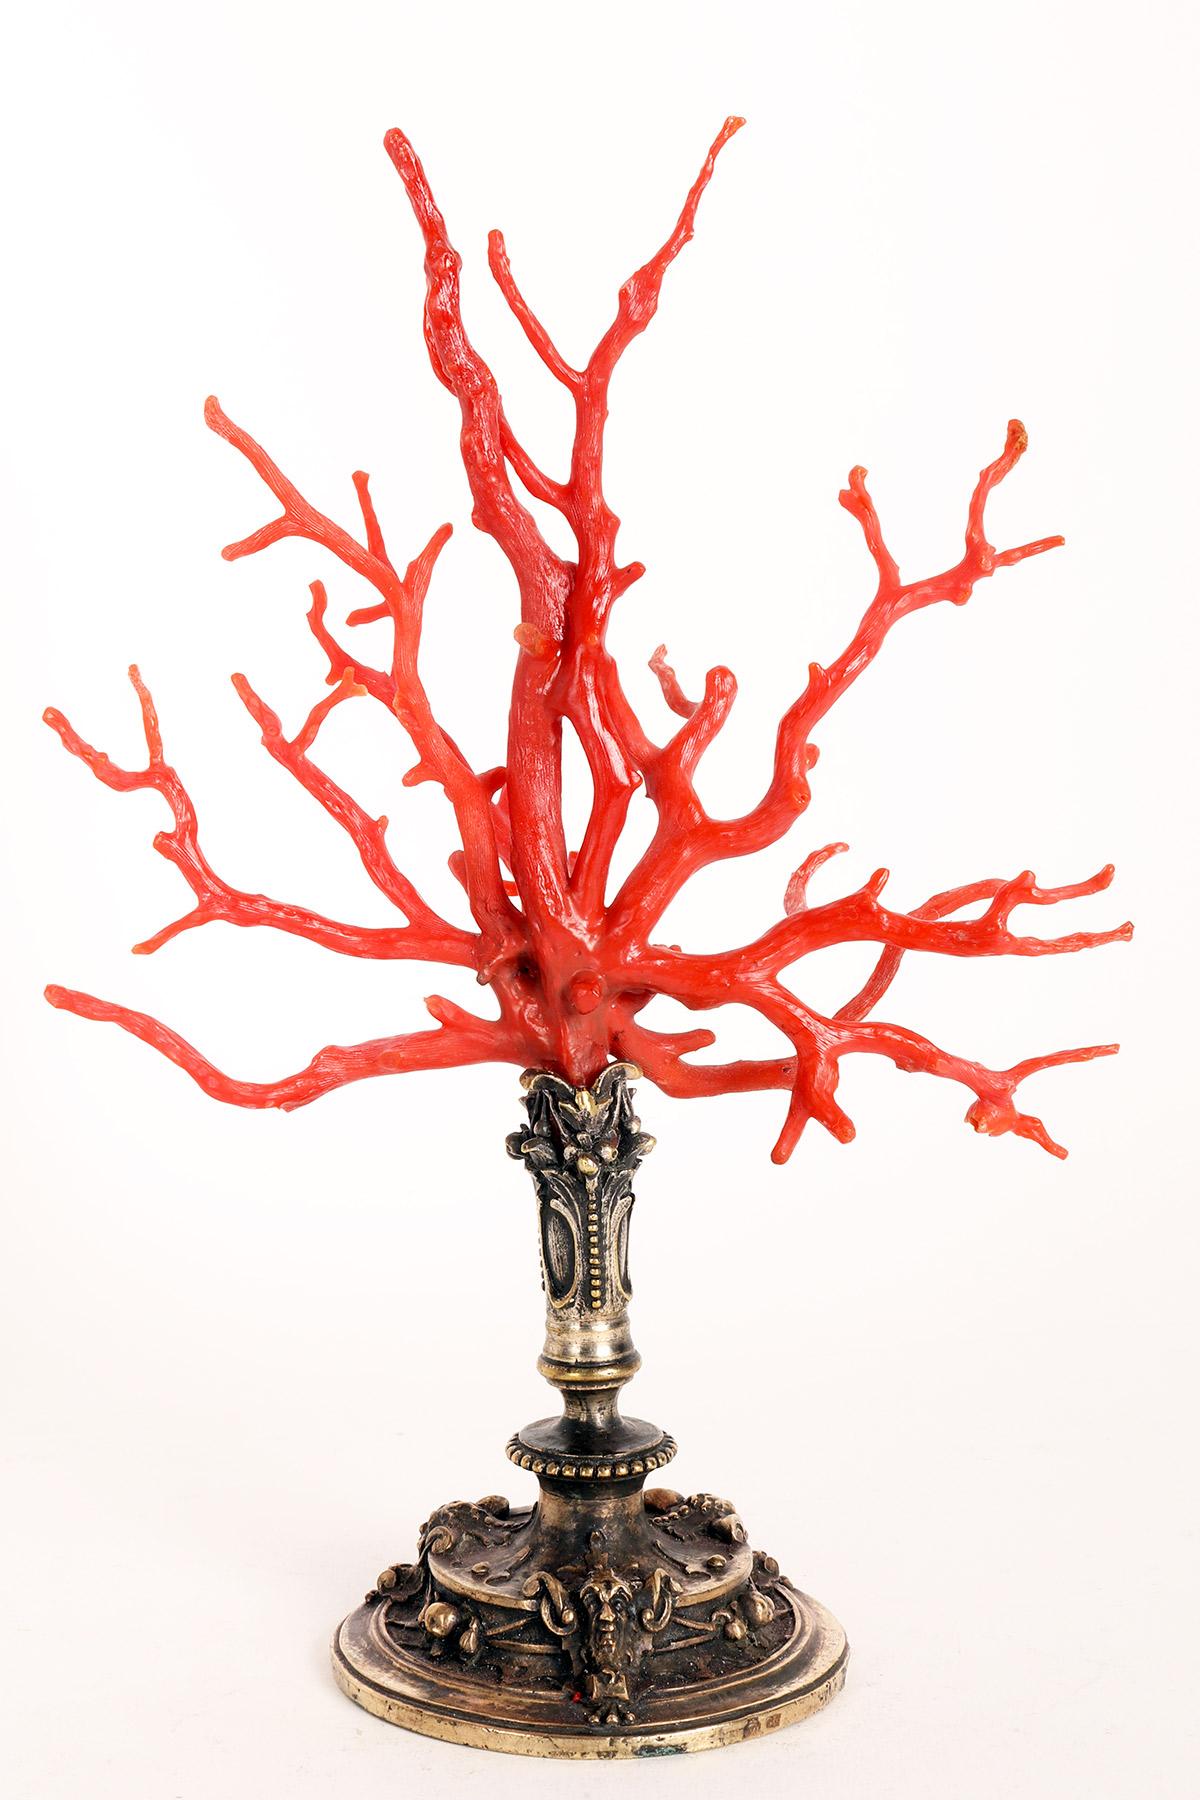 Bronze Coral Branch from Wunderkammer, Caltagirone, Sicily, Italy 1820